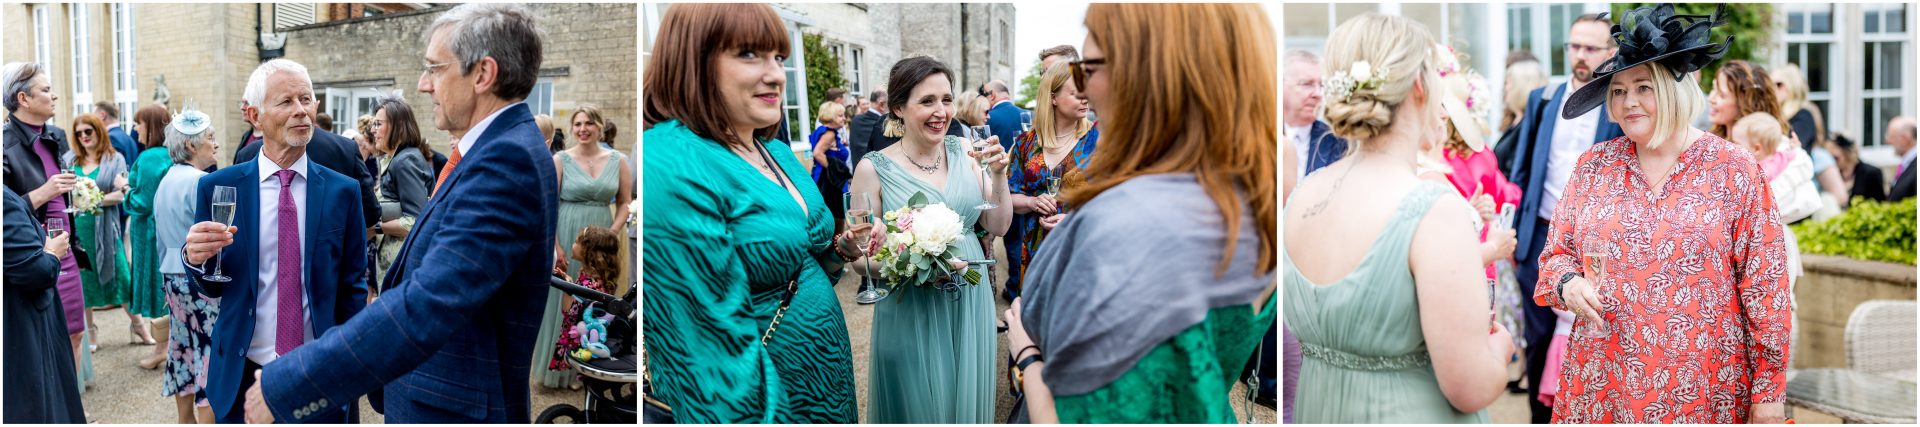 Candid wedding guest photographs in Hampshire